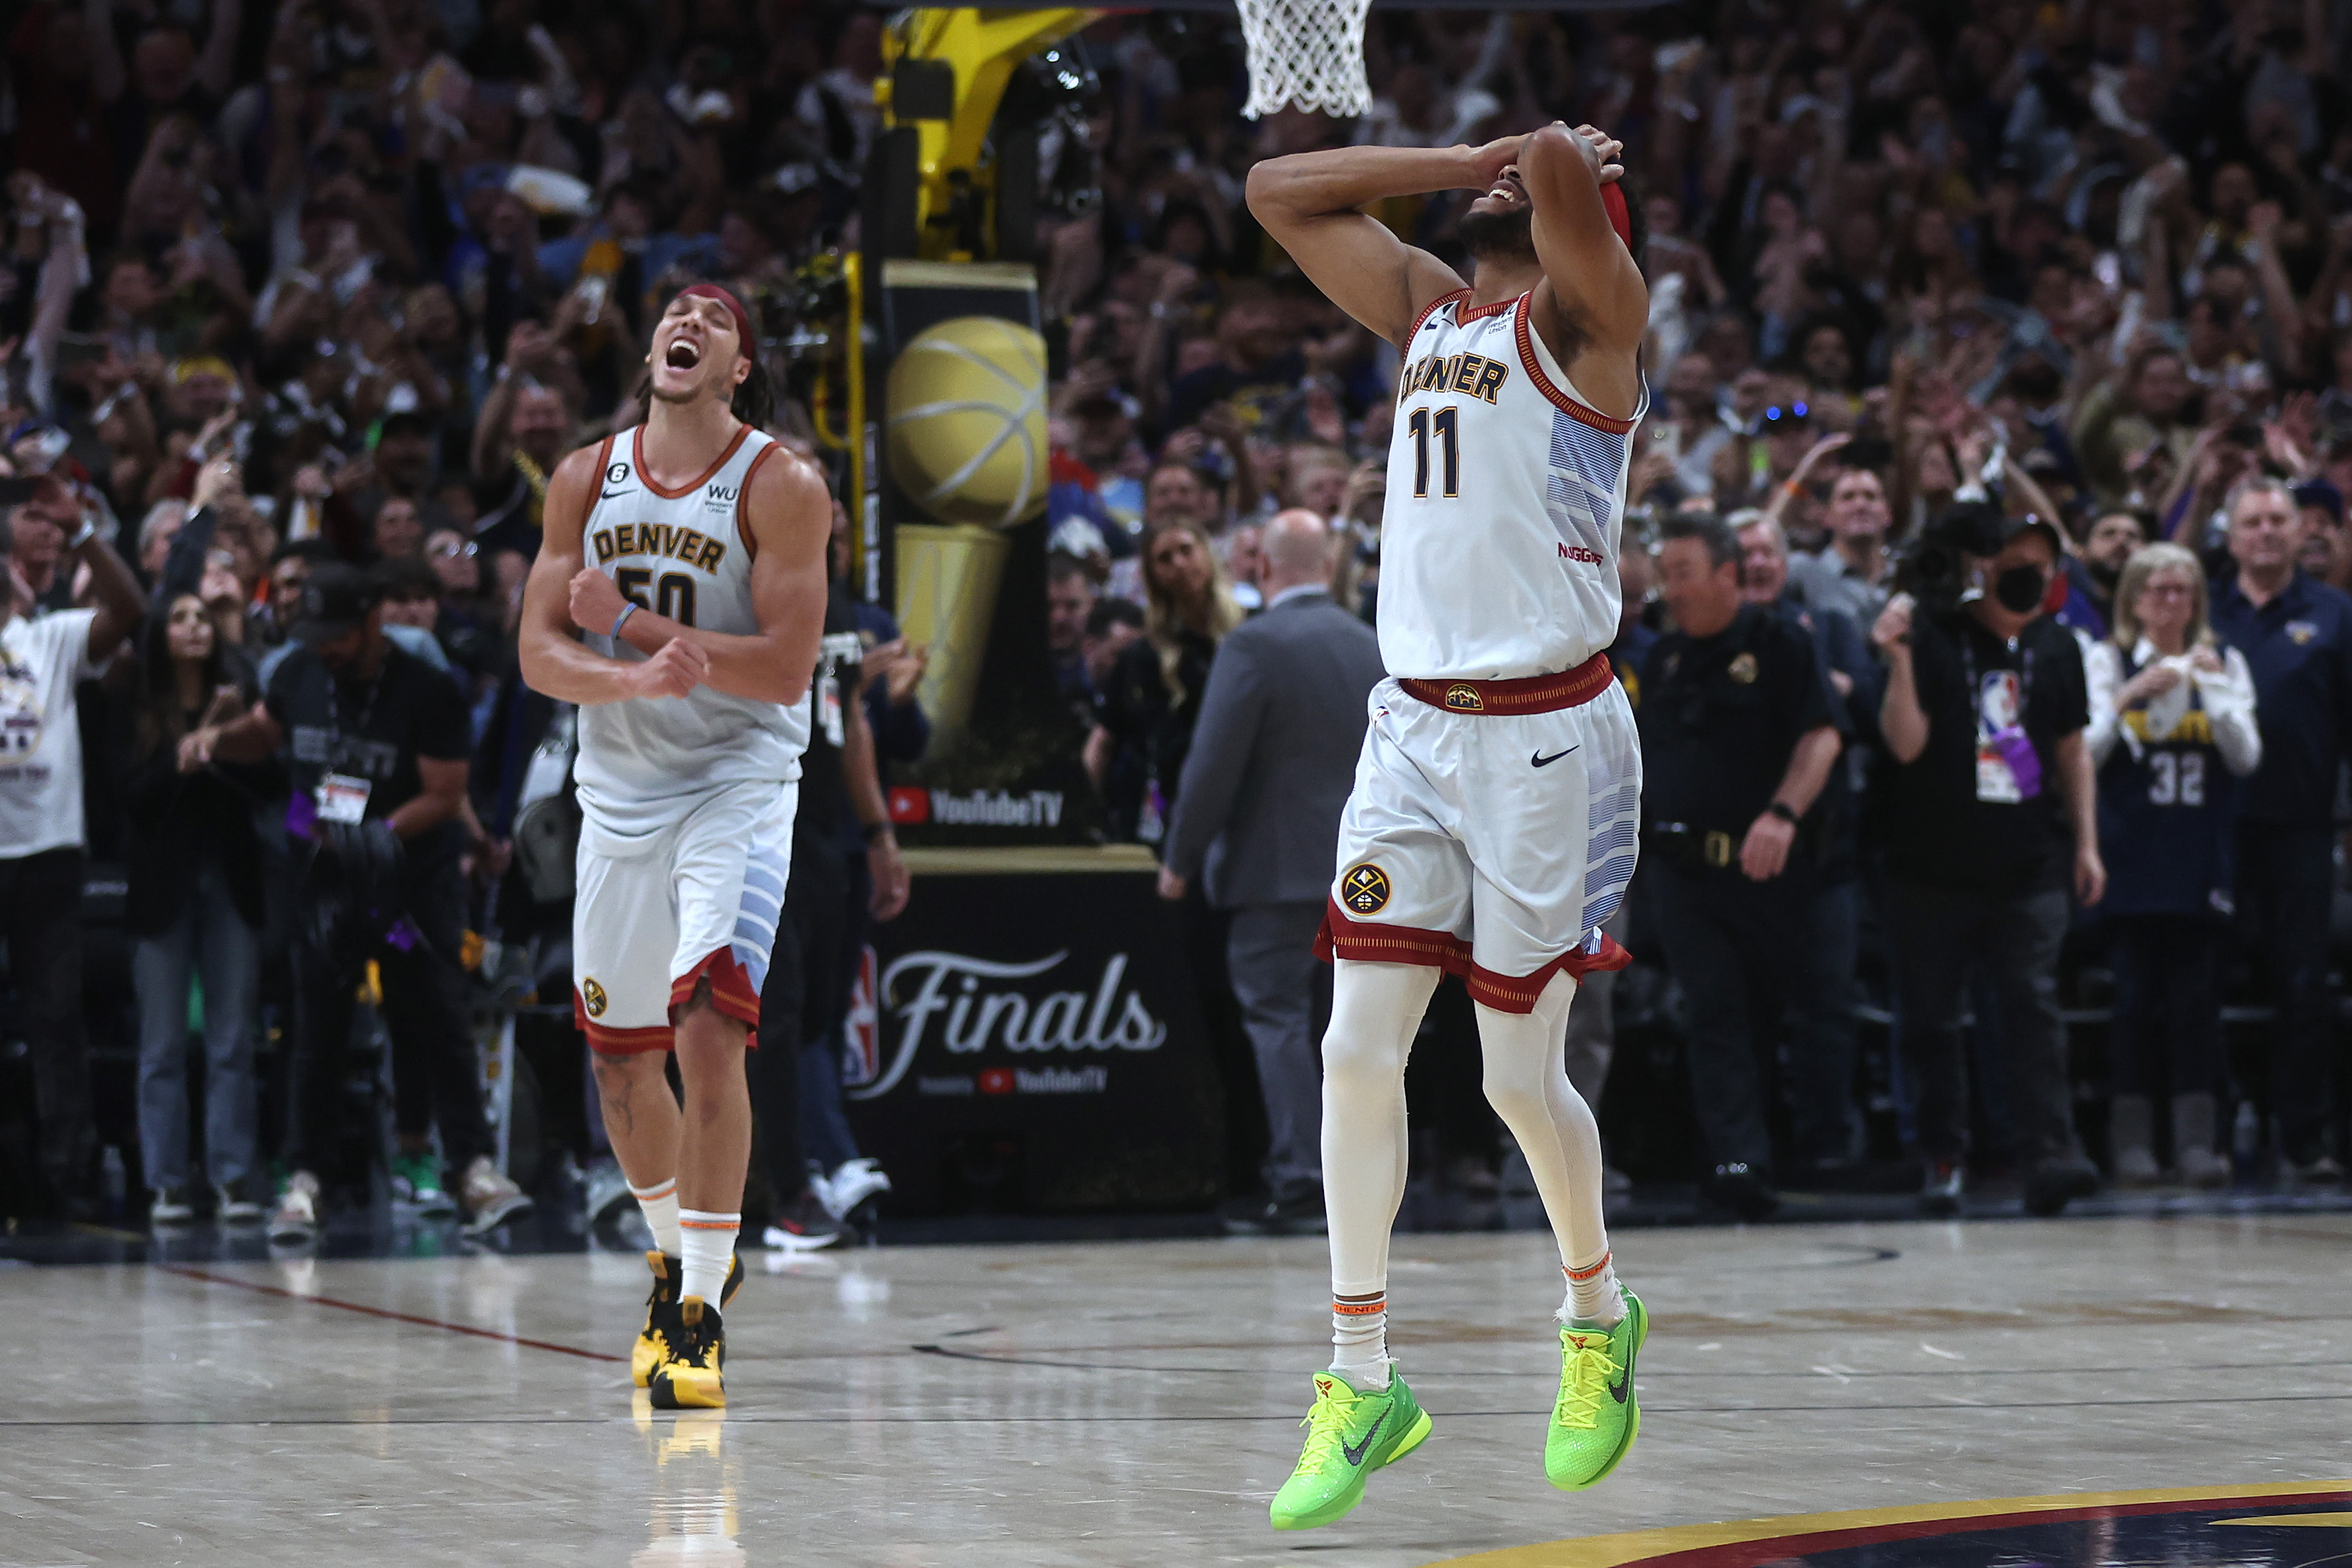 Nuggets win franchise's first NBA championship after holding off